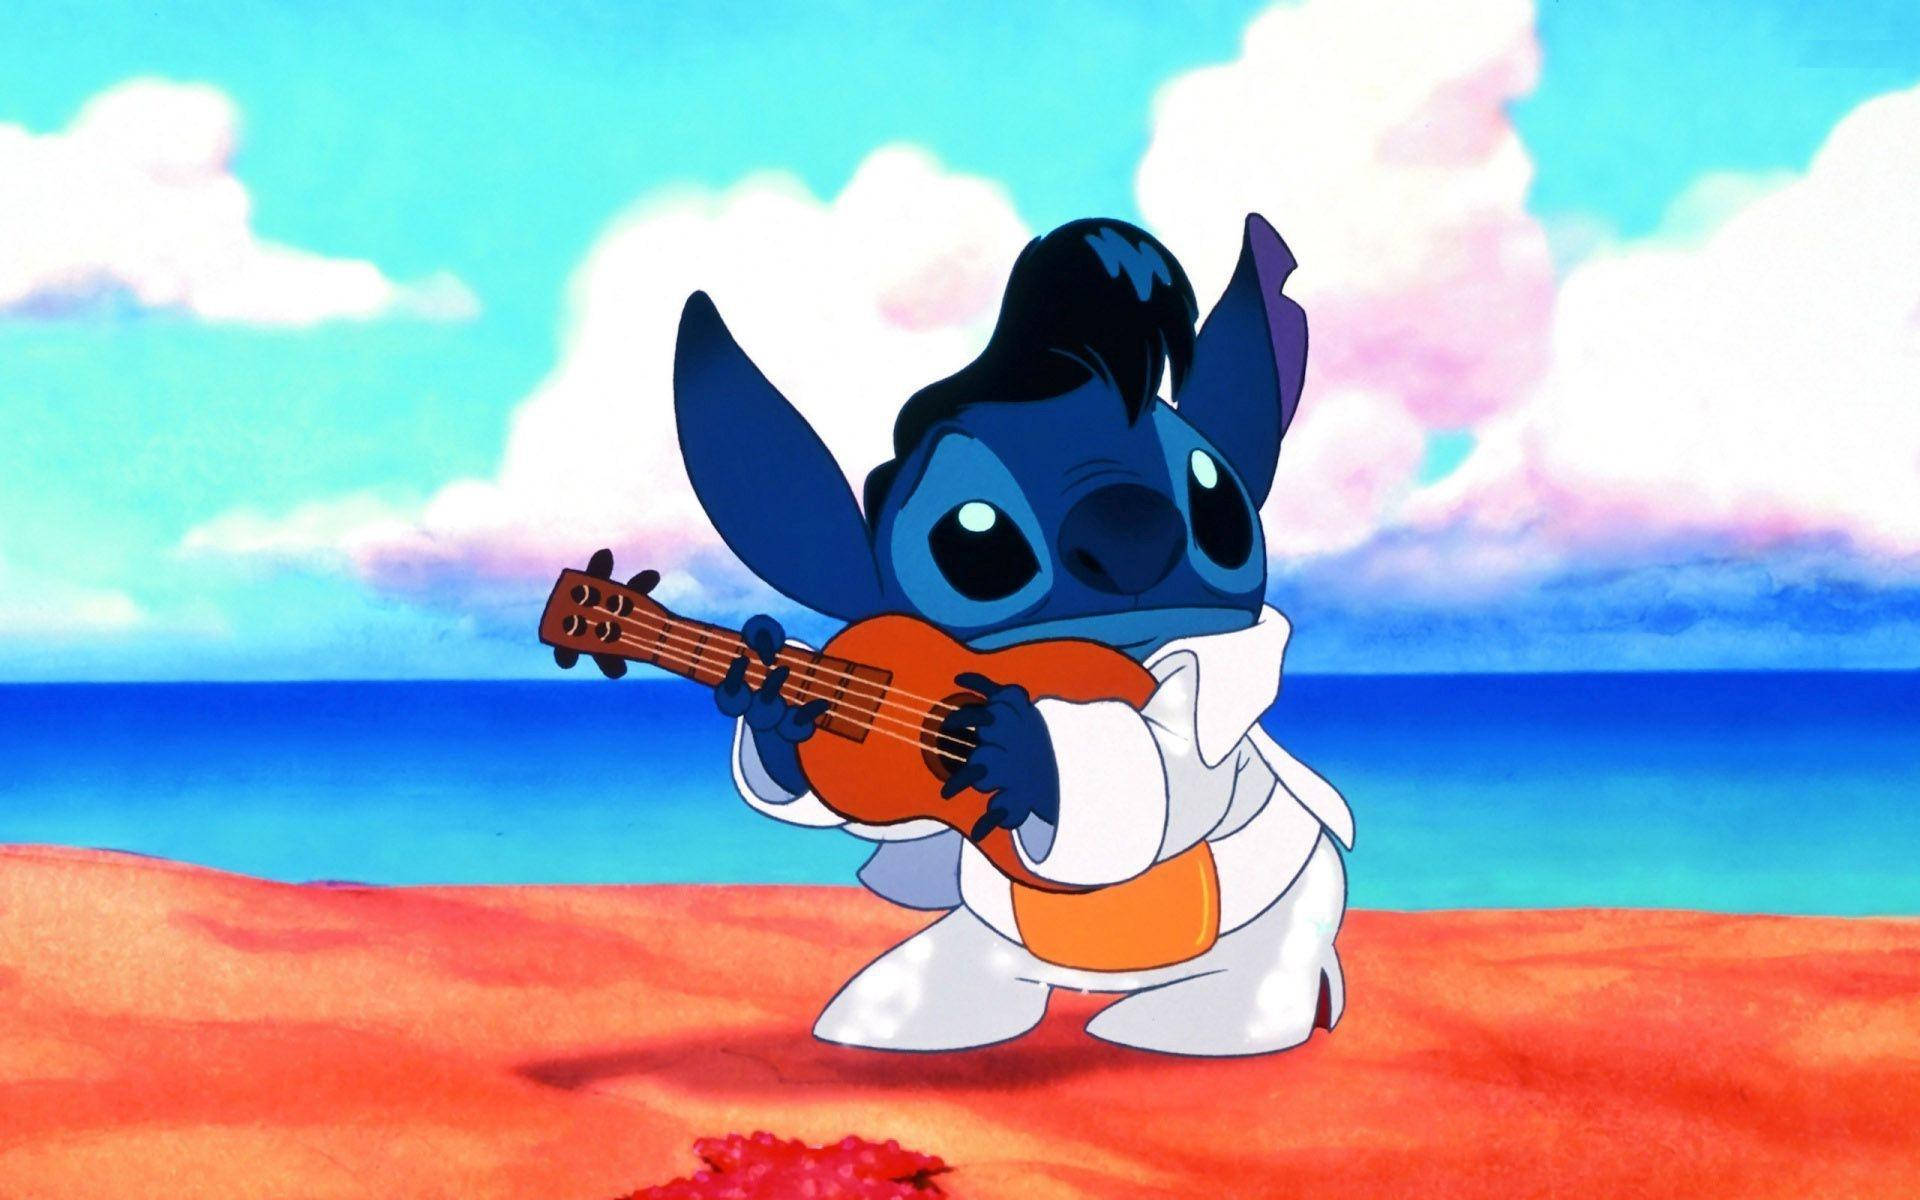 Cute Aesthetic Stitch With Guitar Wallpaper